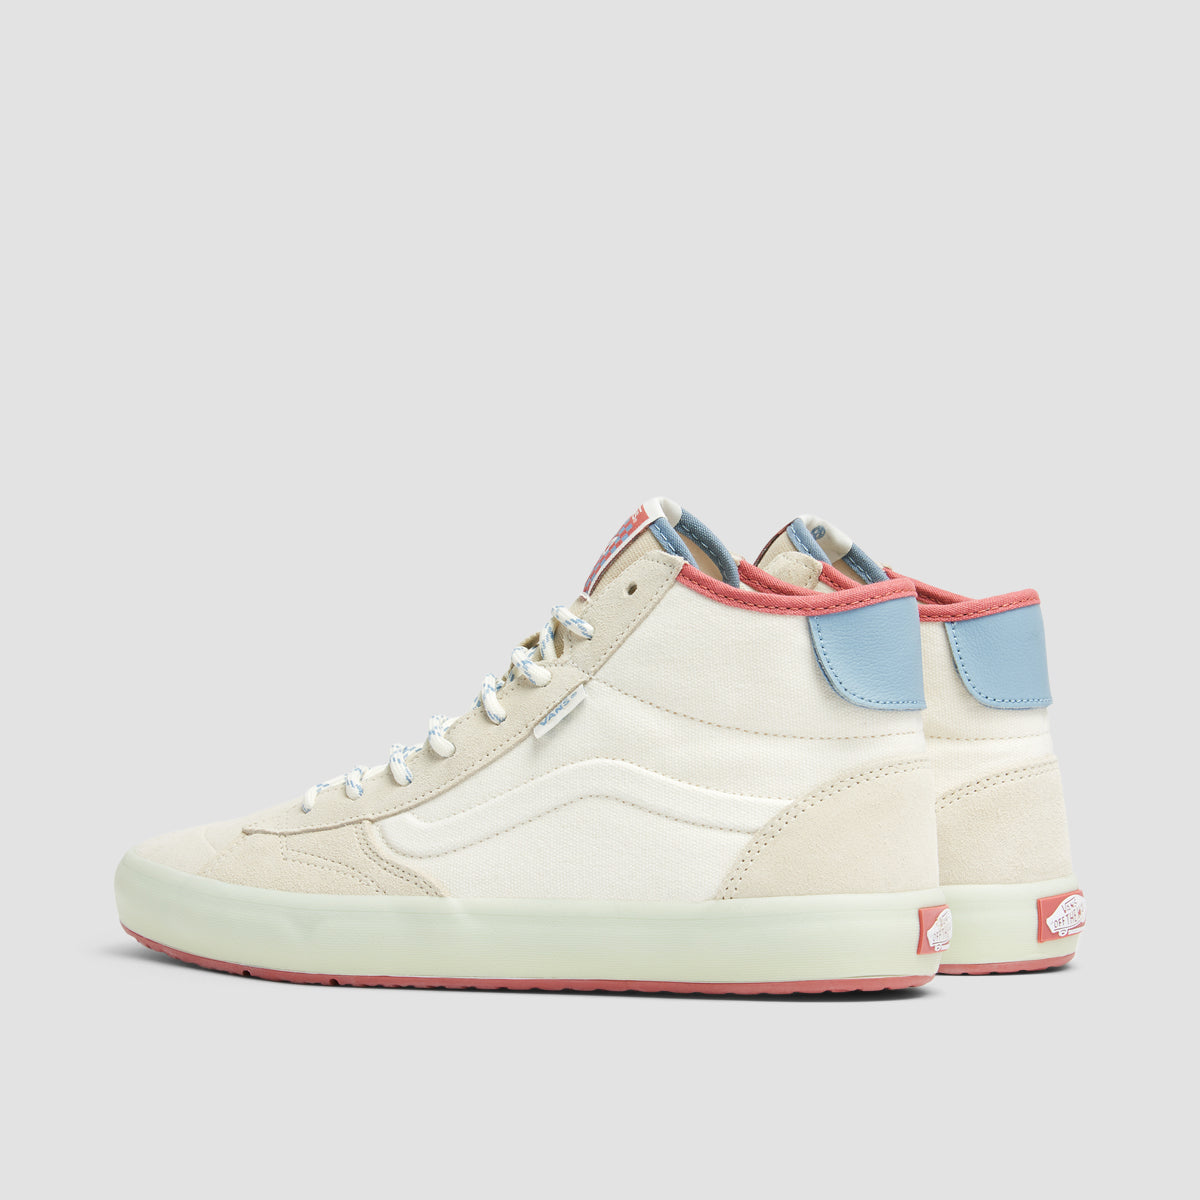 Vans The Lizzie High Top Shoes - Marshmallow/Multi